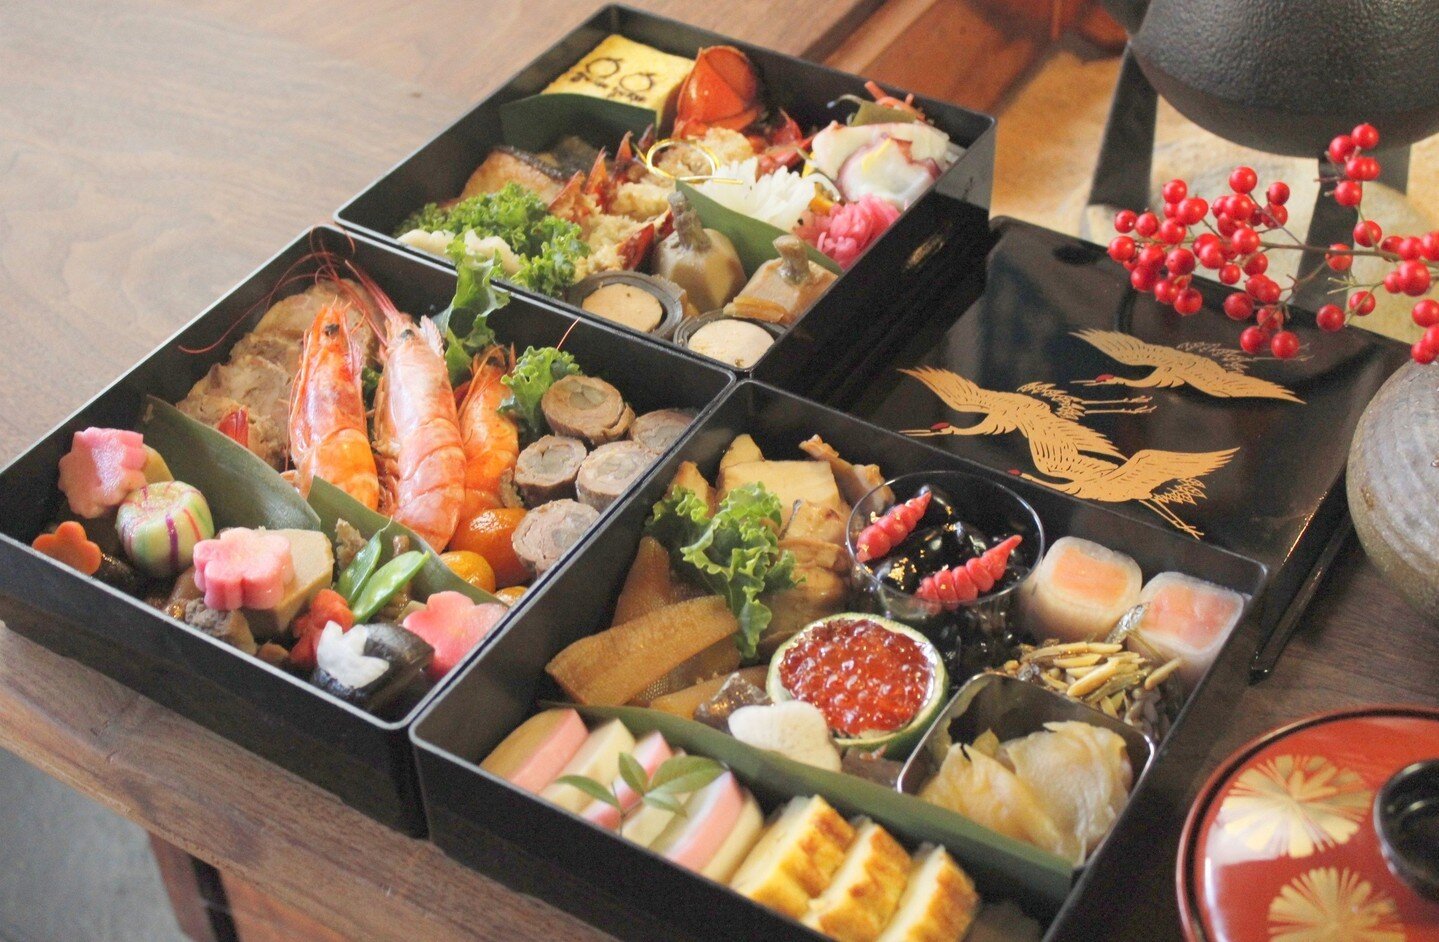 We are accepting OSECHI orders!
Check gakyudc.com